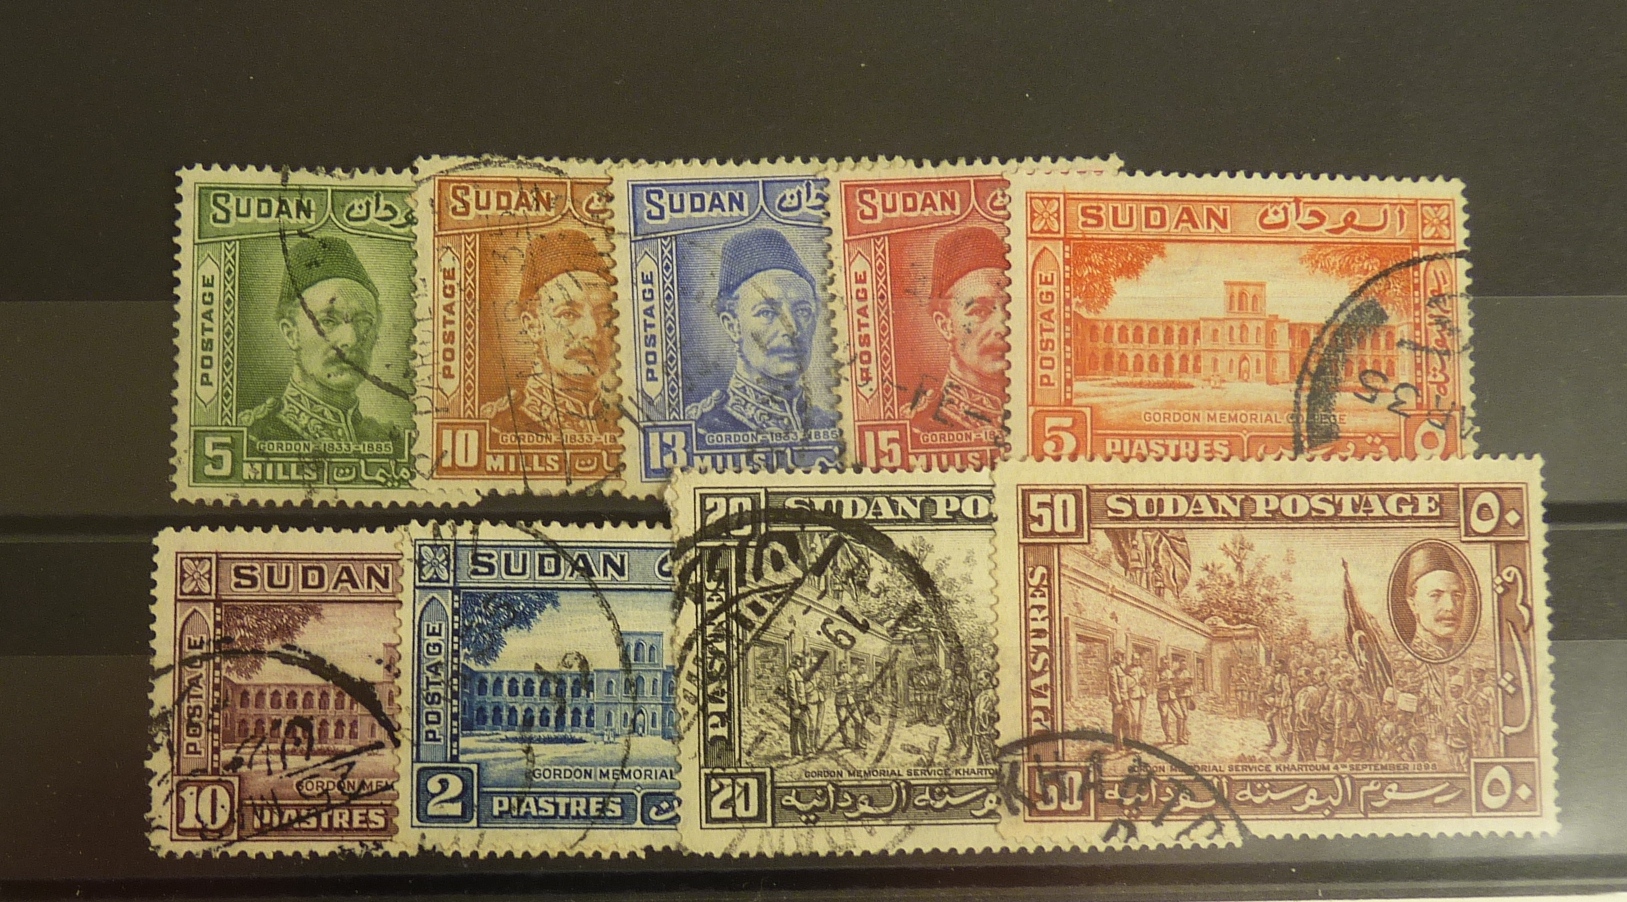 SUDAN: 1935 General Gordon 5m to 50p, S.G.59-67, set of 9, used, average condition. Catalogue